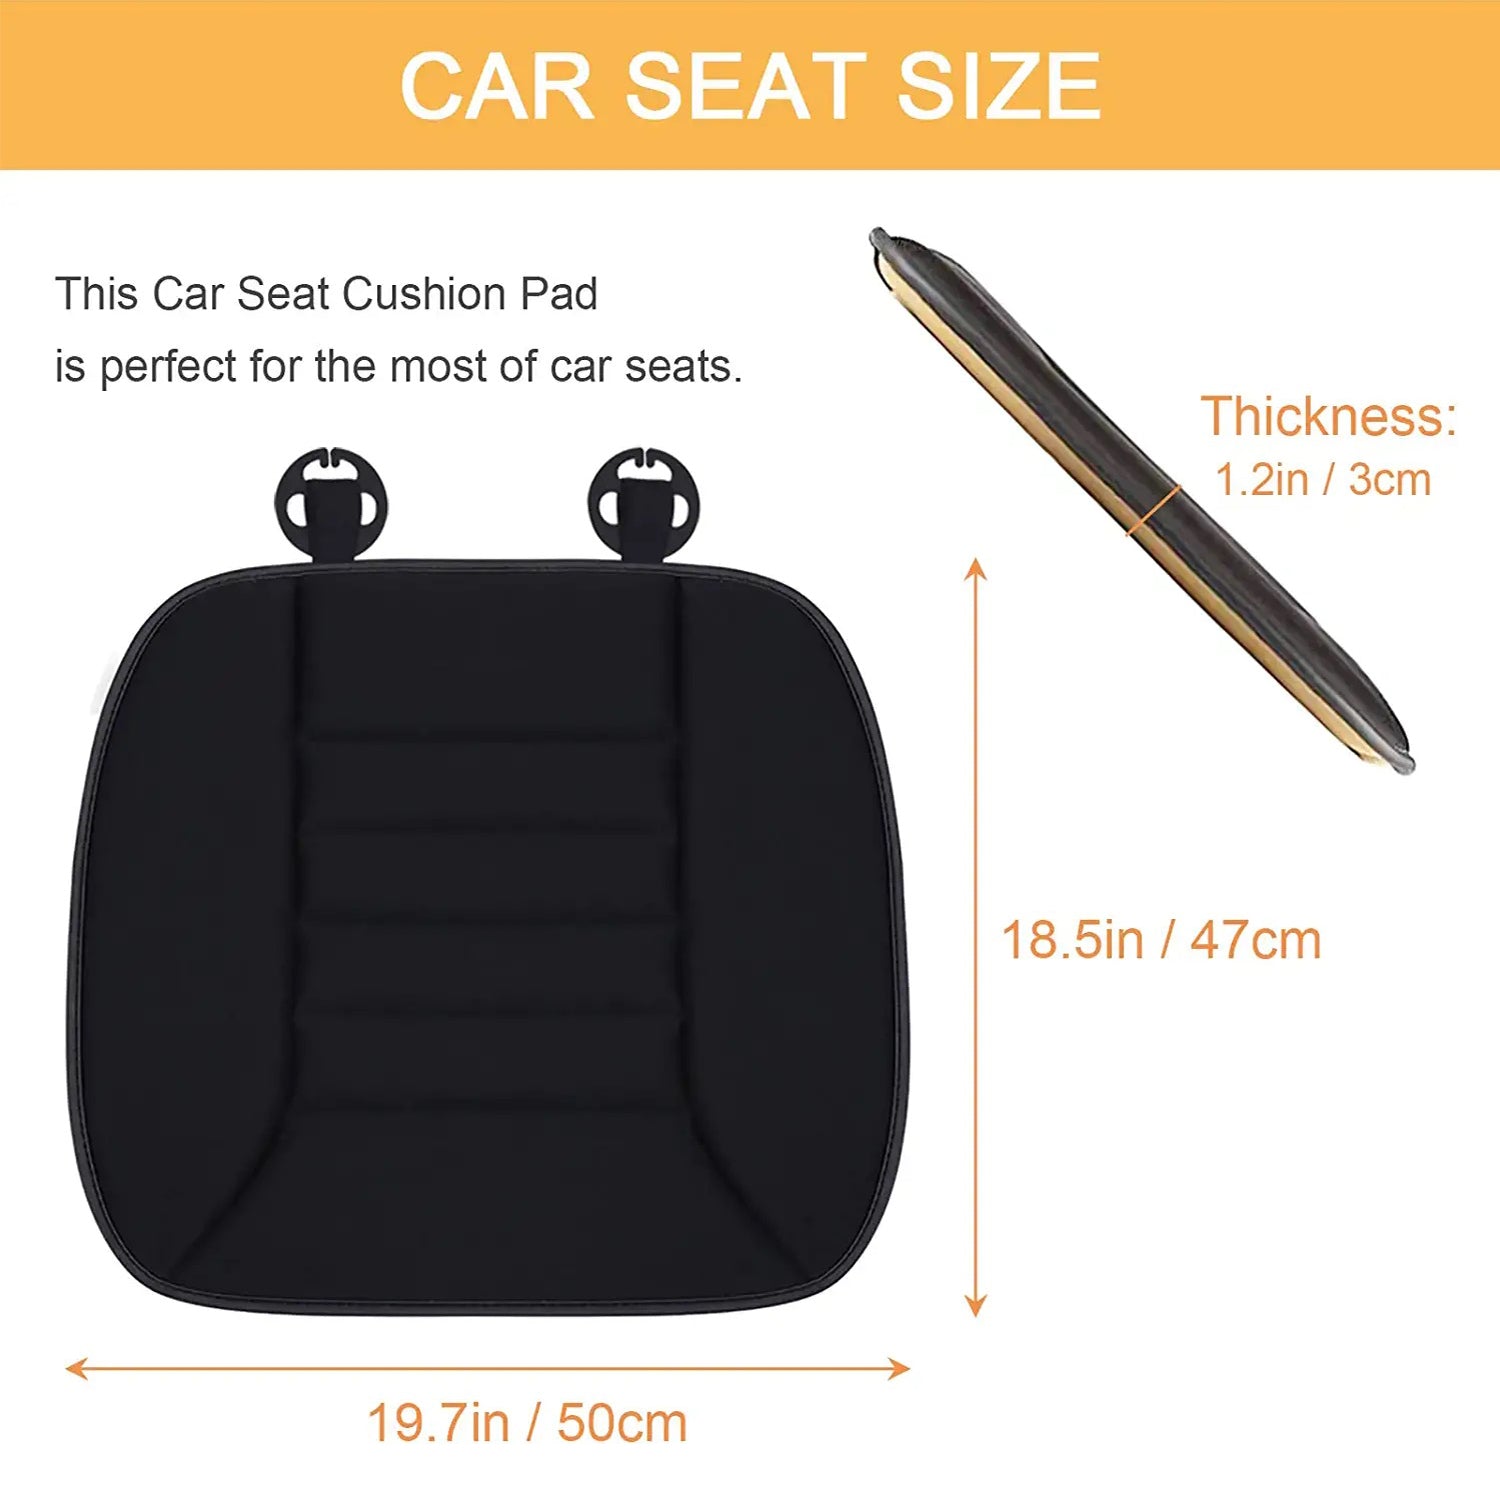 Car Seat Cushion with 1.2inch Comfort Memory Foam, Custom-Fit For Car, Seat Cushion for Car and Office Chair DLMB247